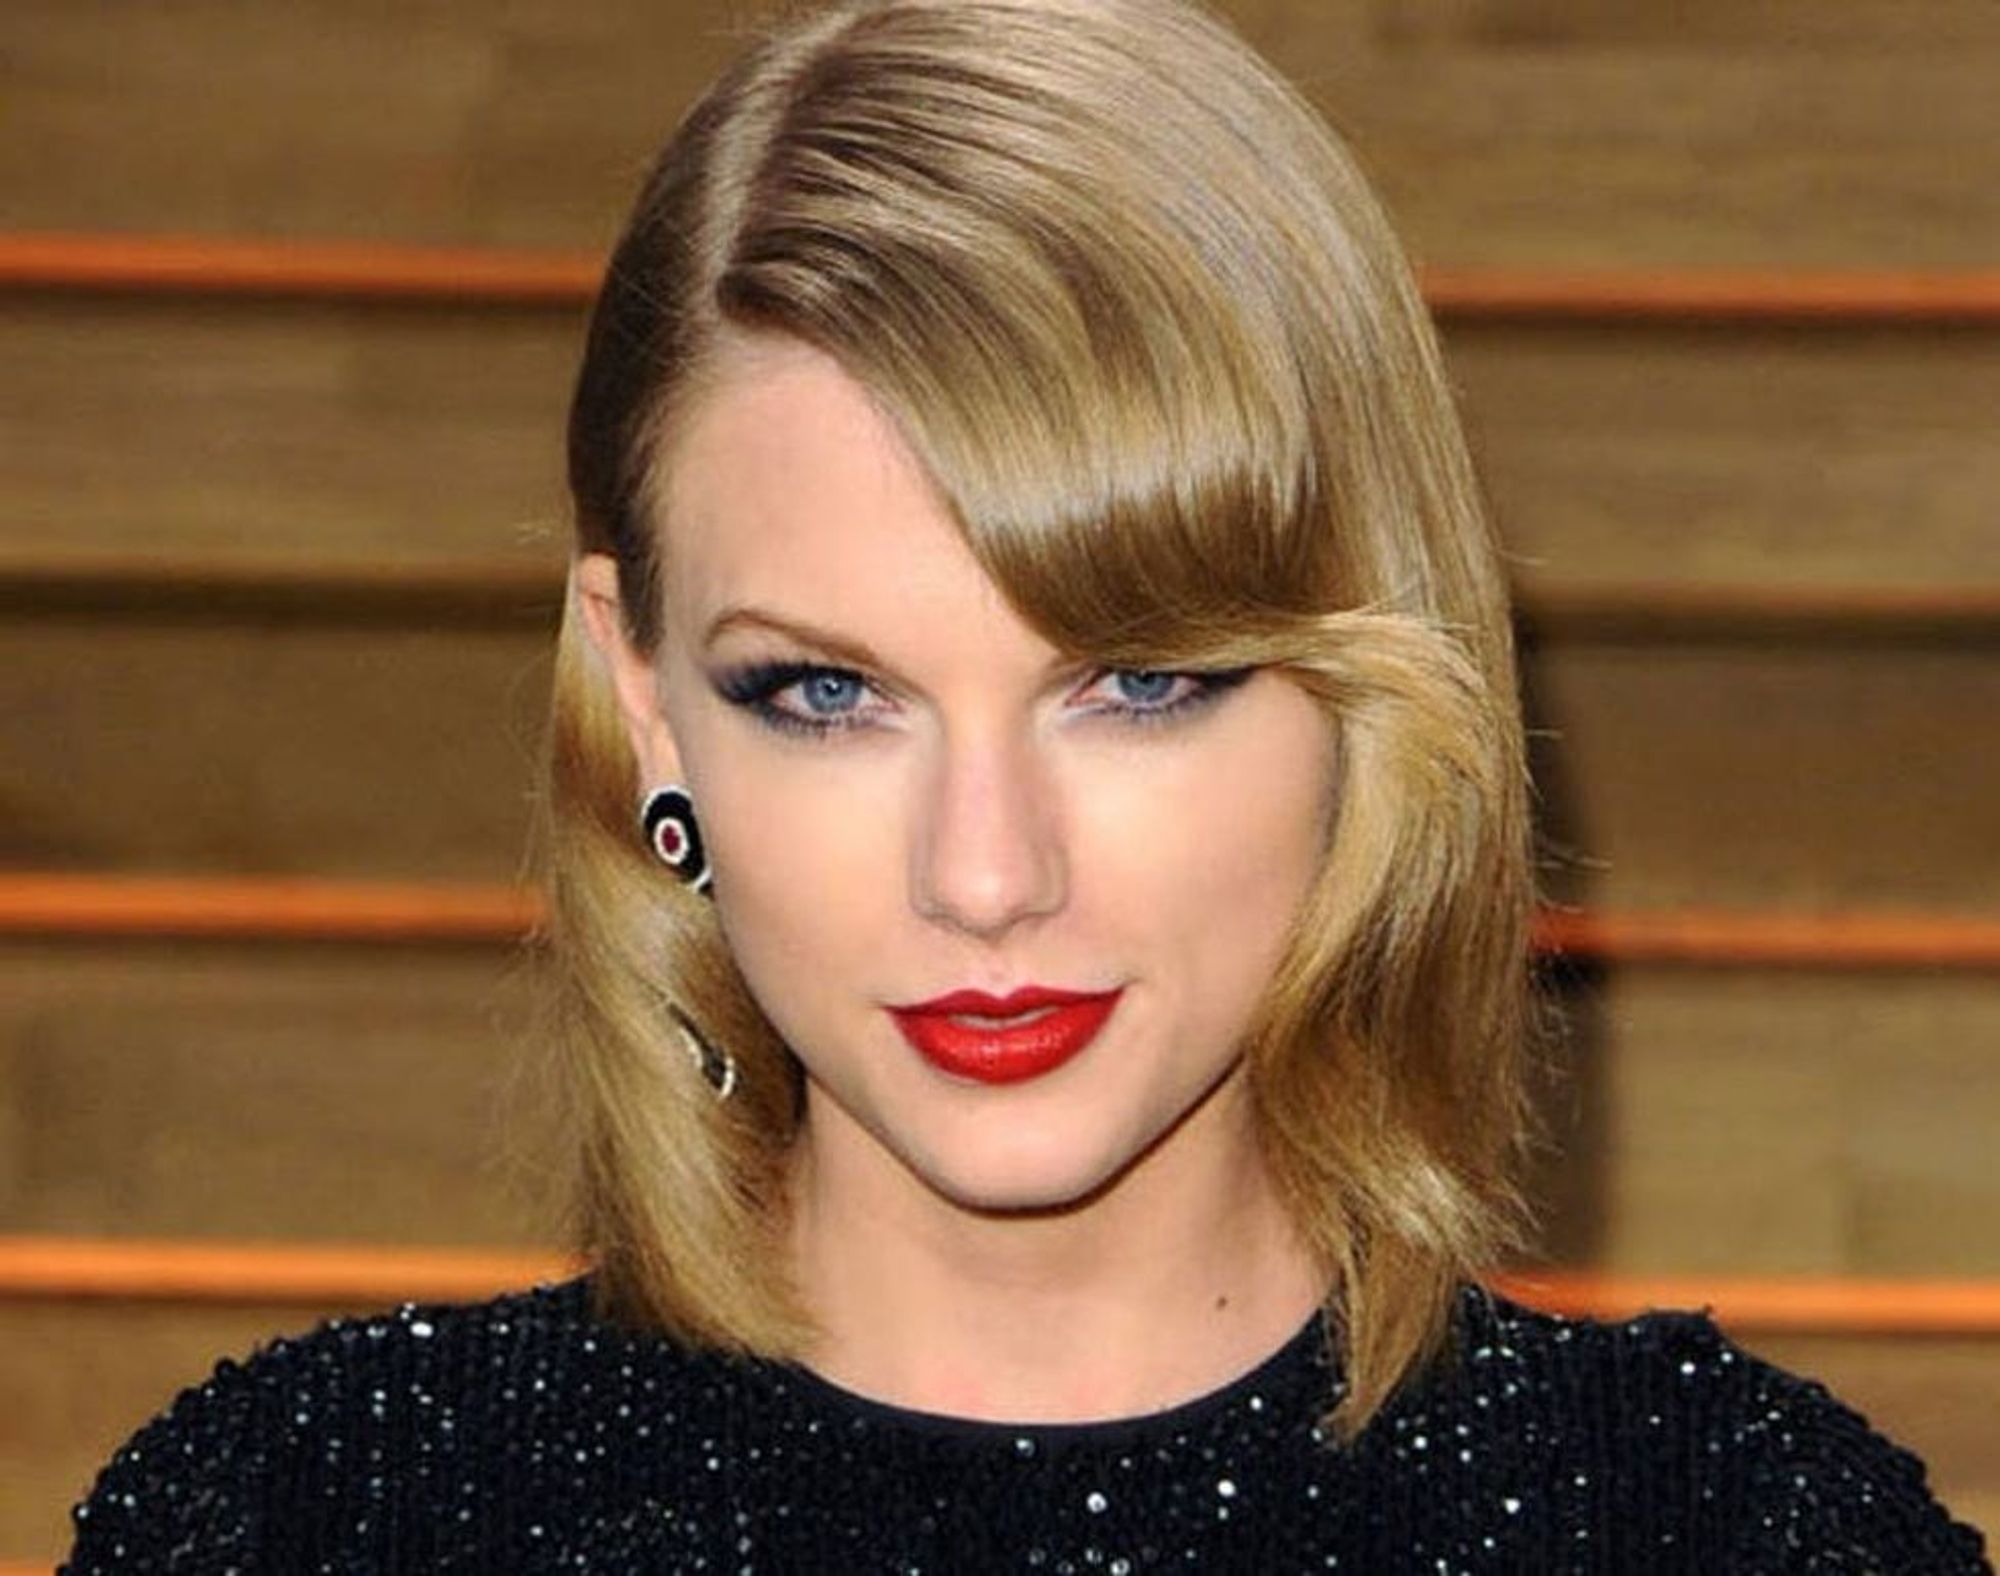 22 of Taylor Swift’s Best Curly, Straight + Short Hairstyles - Brit + Co